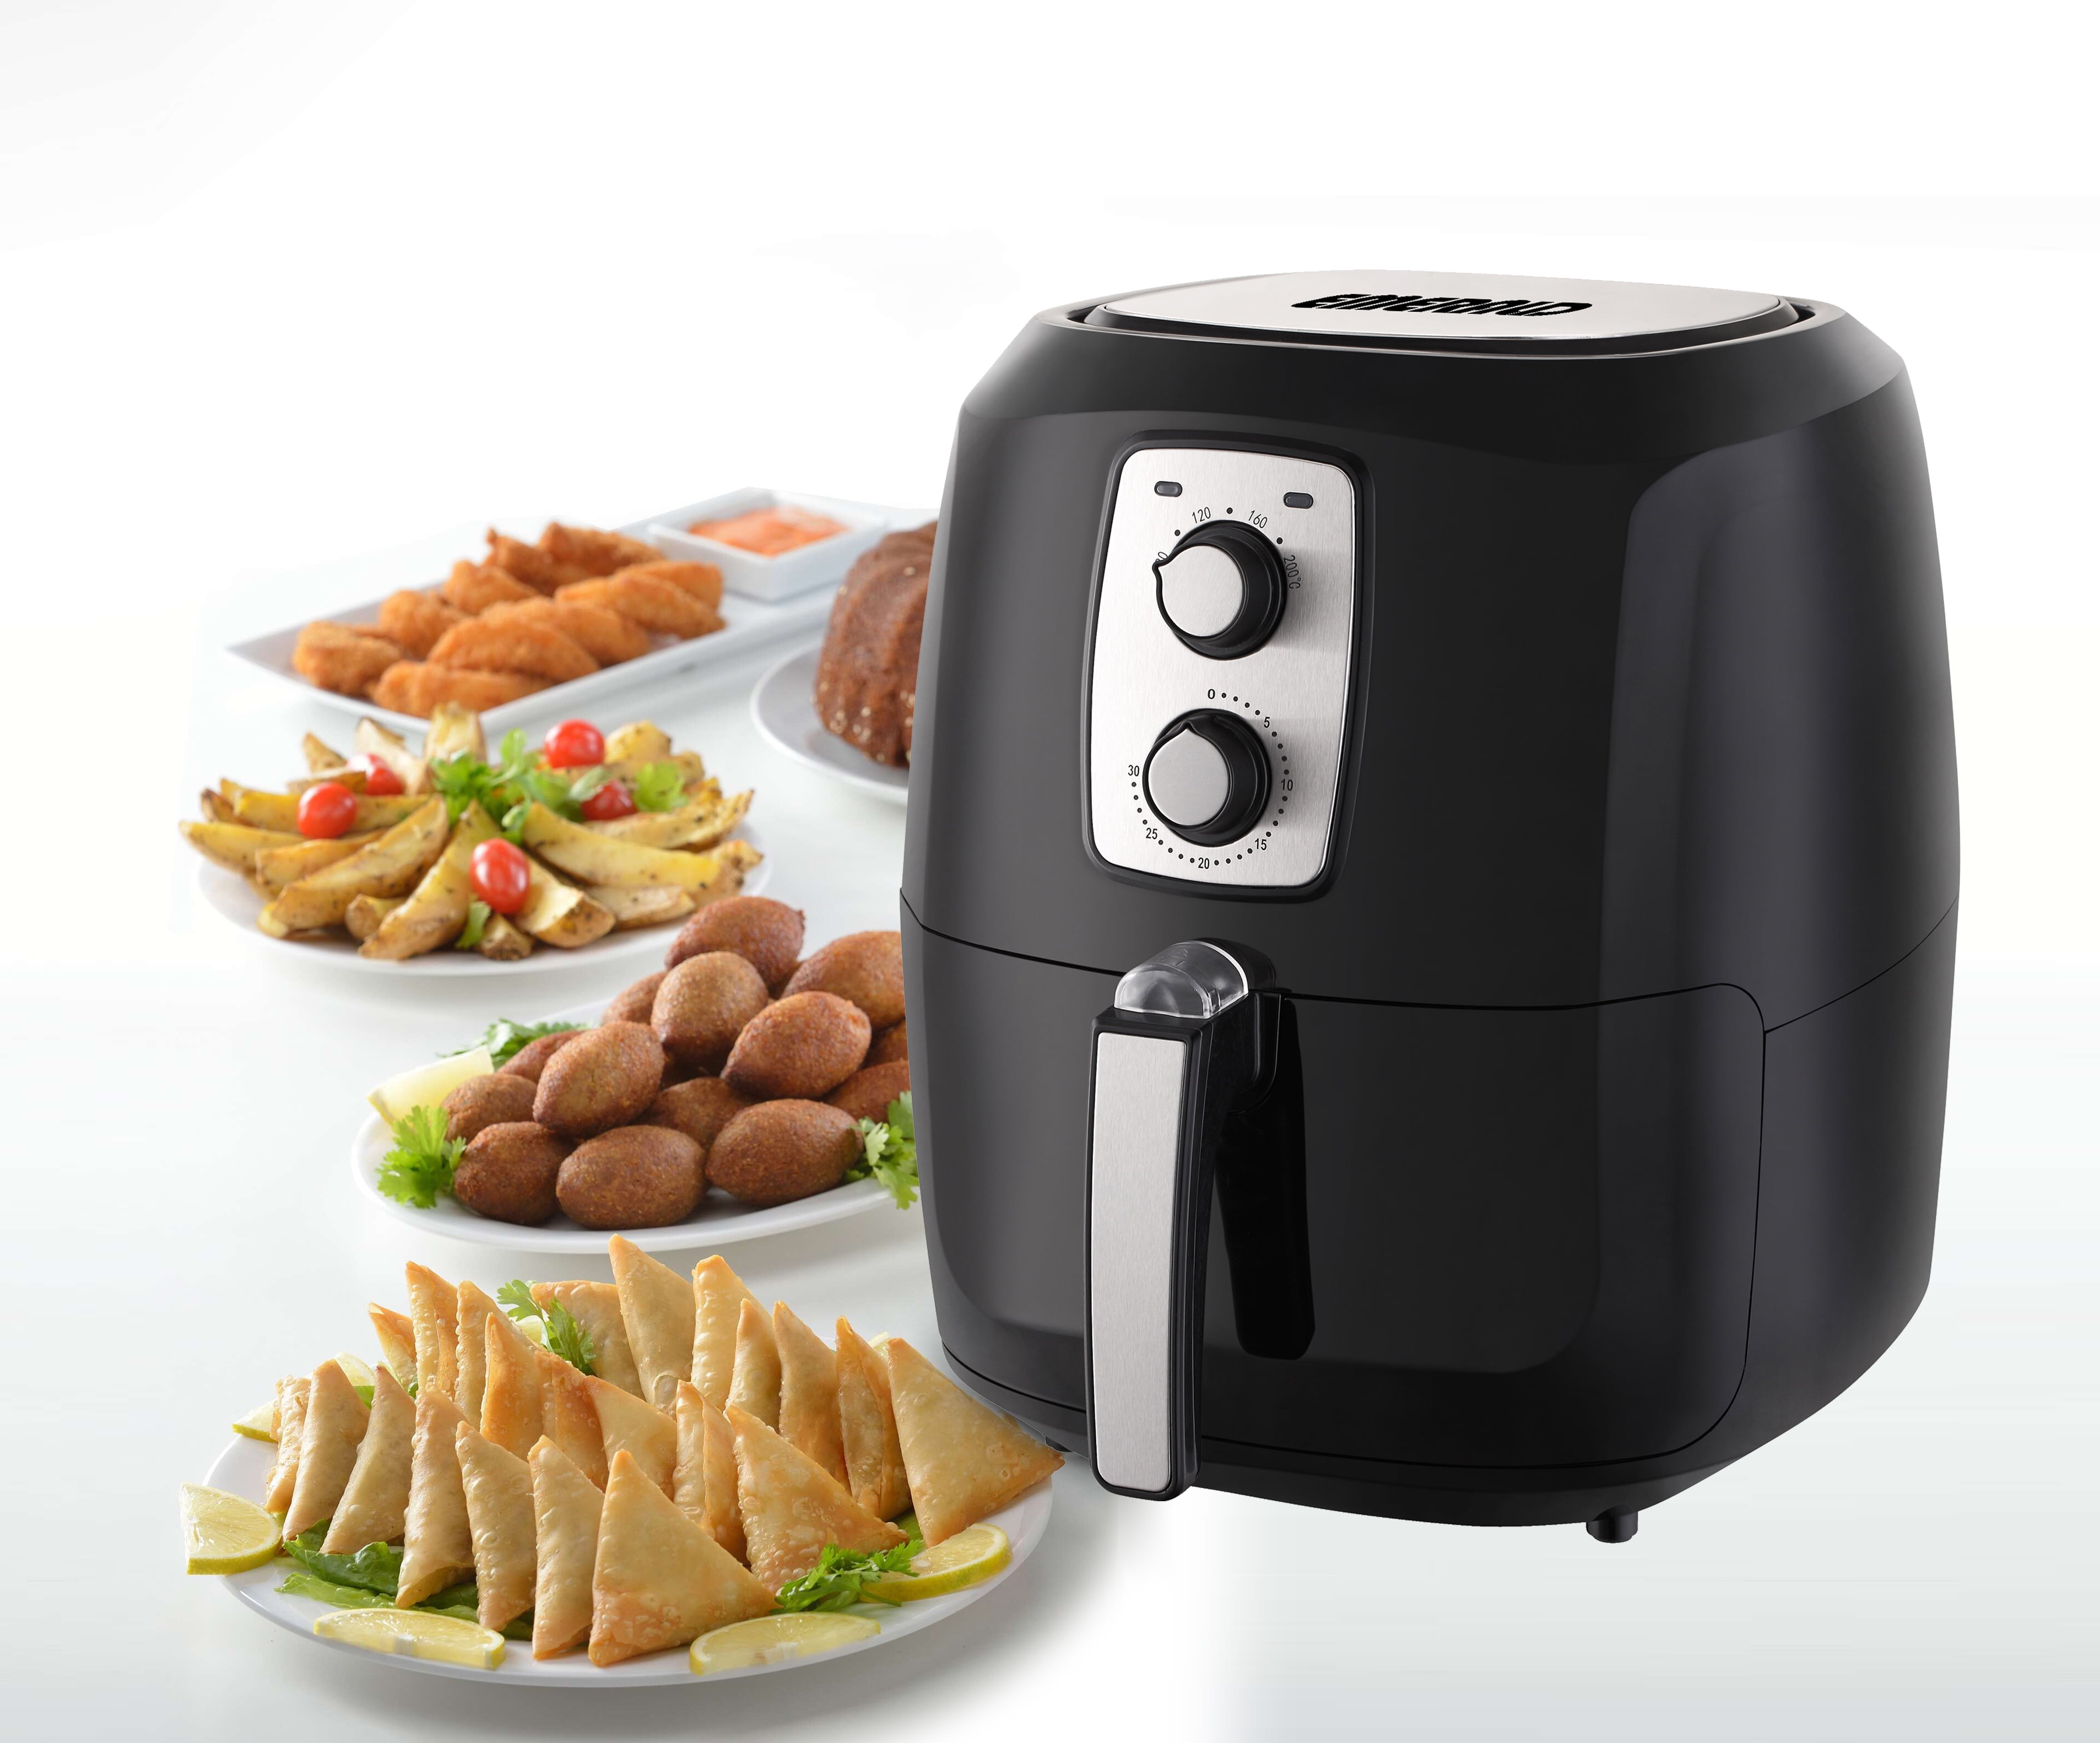 Emerald Compact Air Fryer with Temperature Control- 2L Capacity SM